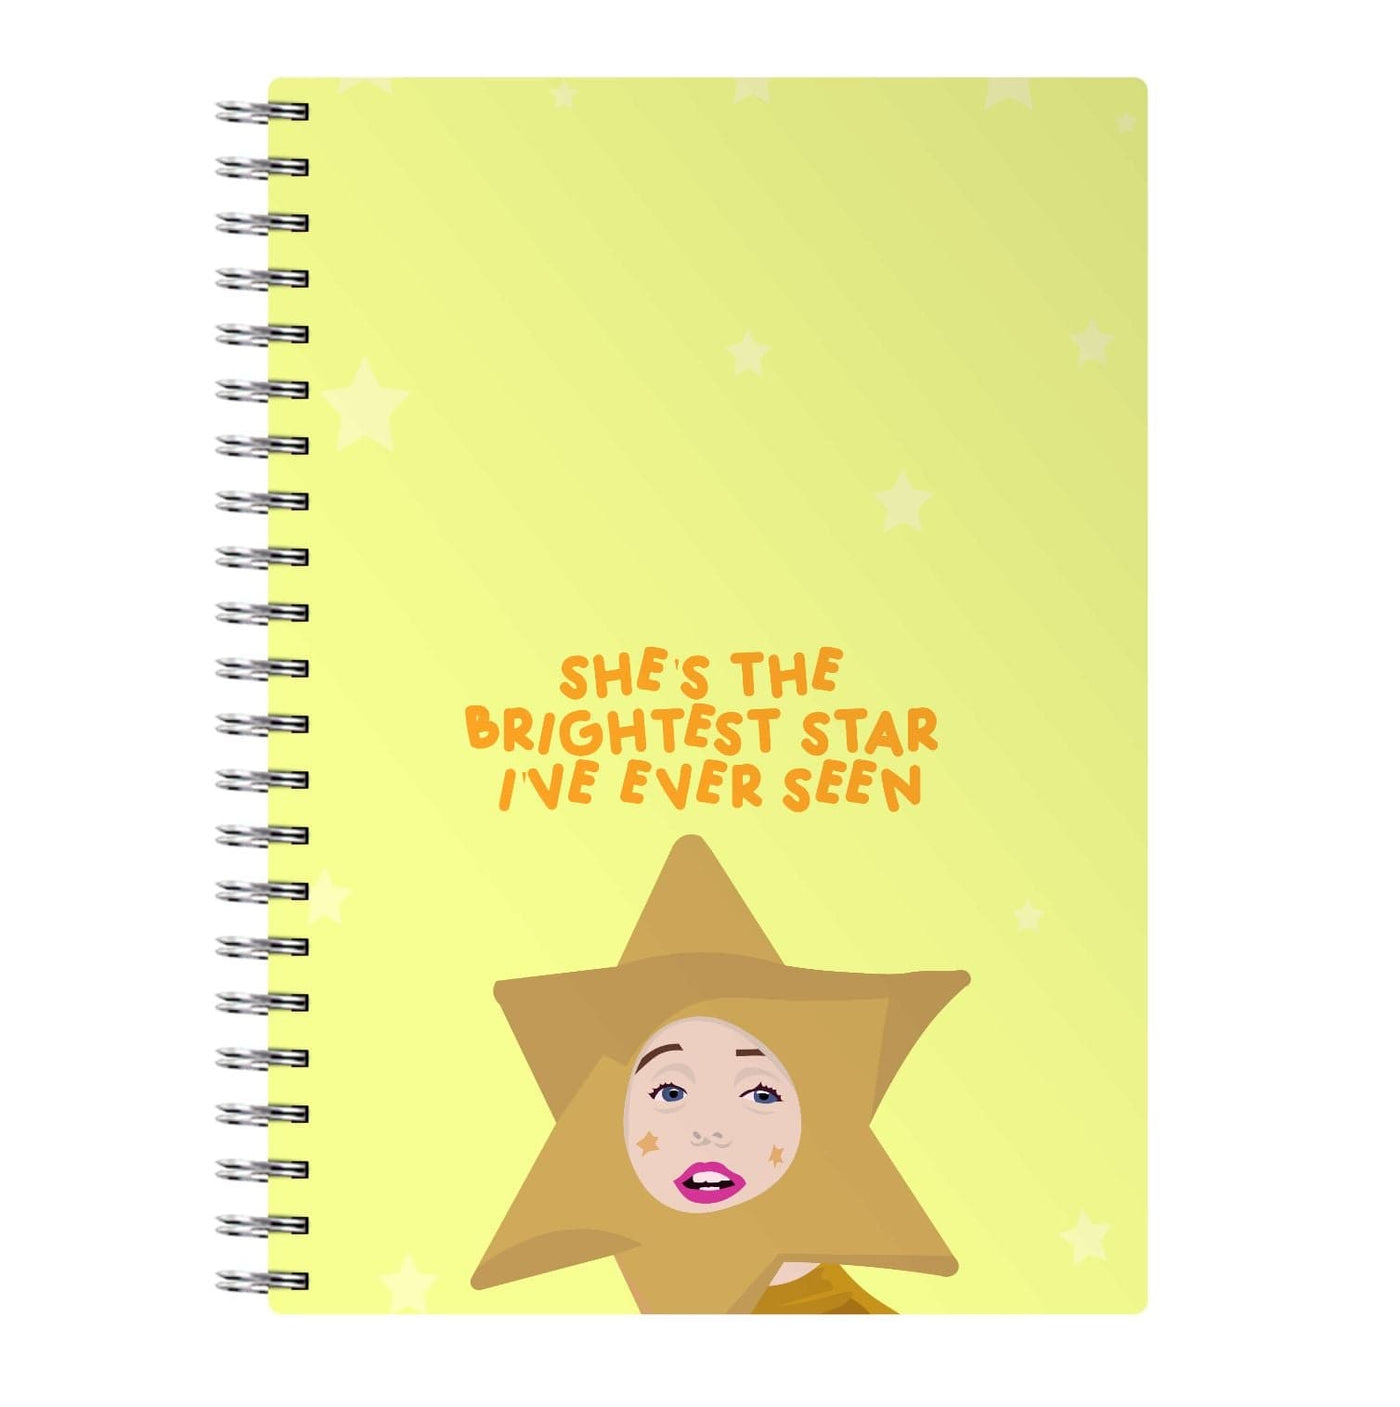 She's The Brightest Star I've Ever Seen - Christmas Notebook